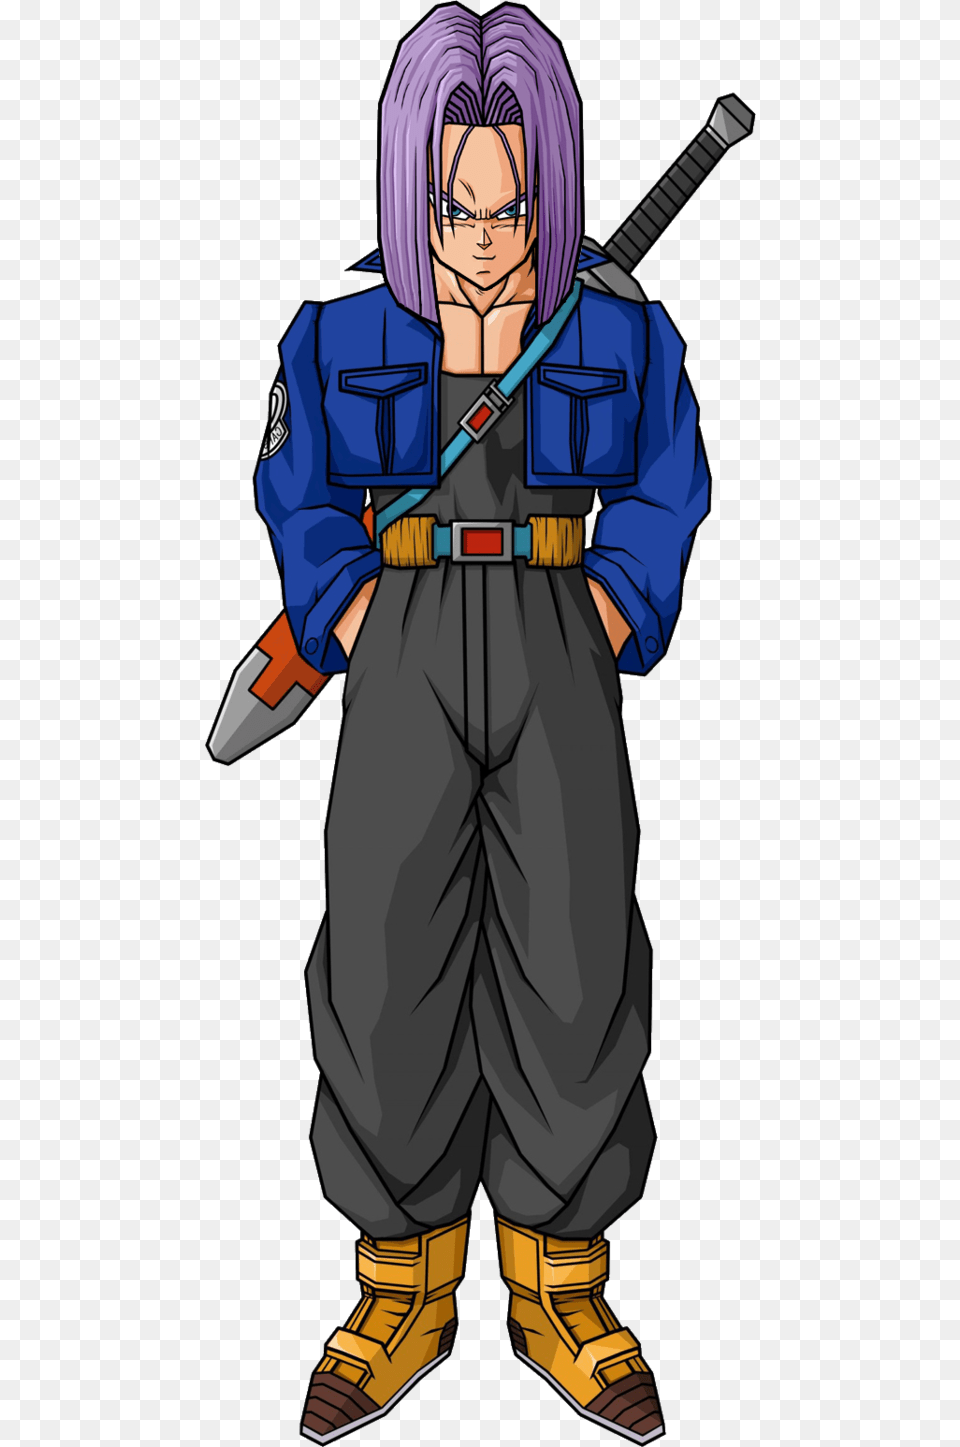 Future Trunks Sword Long Hair By Db Own Universe Arts D3mzy91 Trunks Dragon Ball Long Hair, Book, Comics, Publication, Person Free Transparent Png